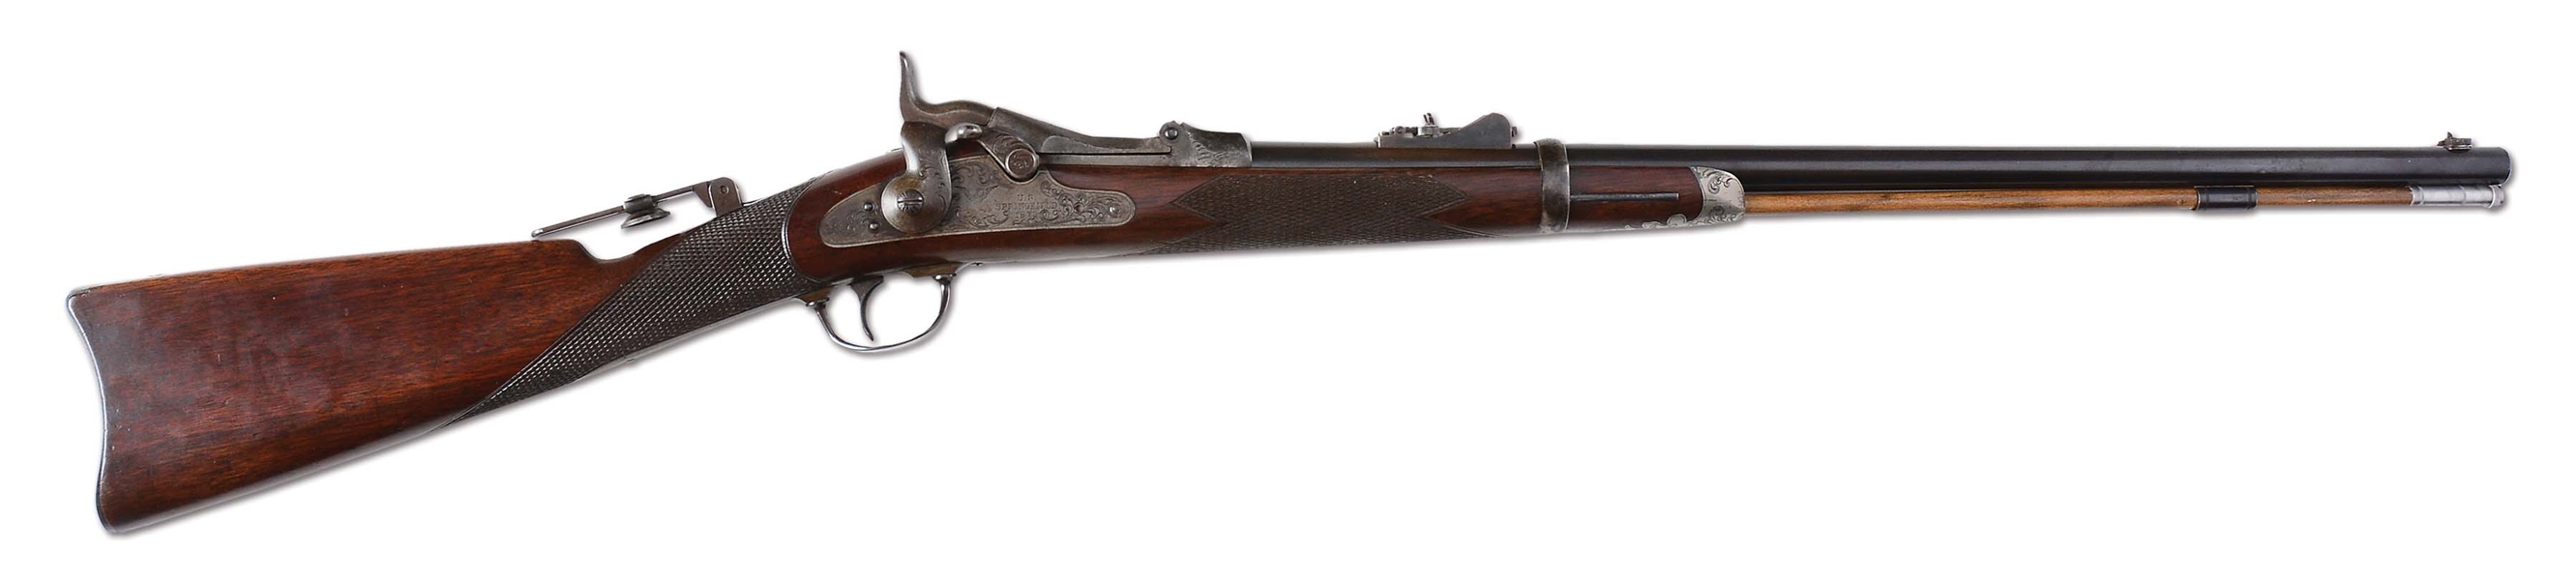 (A) ENGRAVED SPRINGFIELD 1875 FIRST MODEL  OFFICERS TRAPDOOR RIFLE INSCRIBED "J. H. ROLLINS".